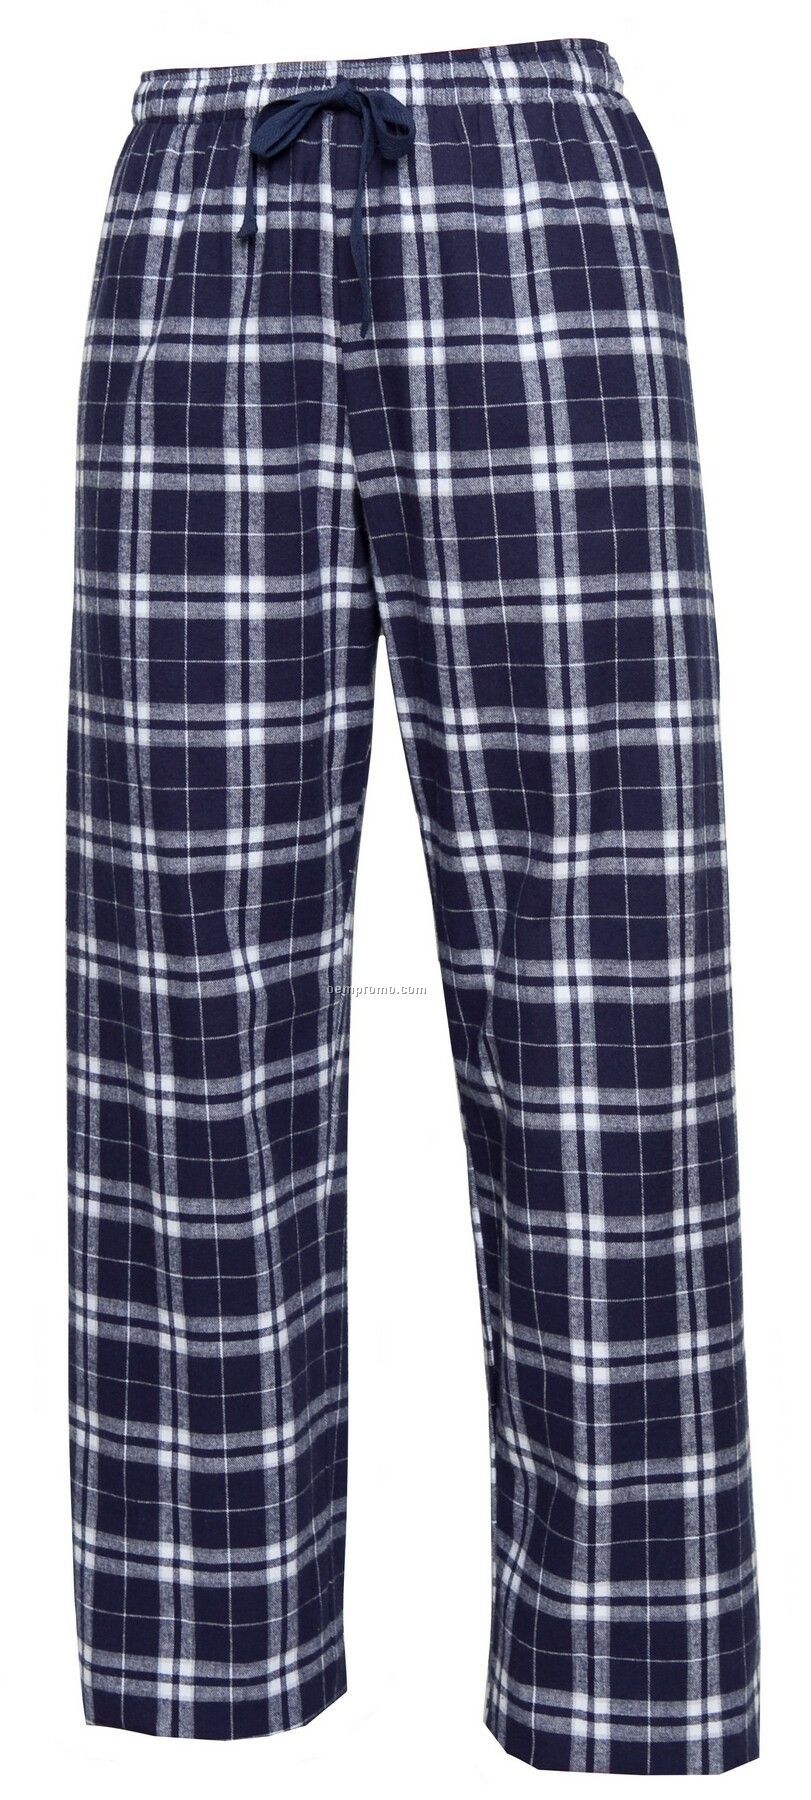 Adult Team Pride Flannel Pant In Navy Blue & Silver Plaid